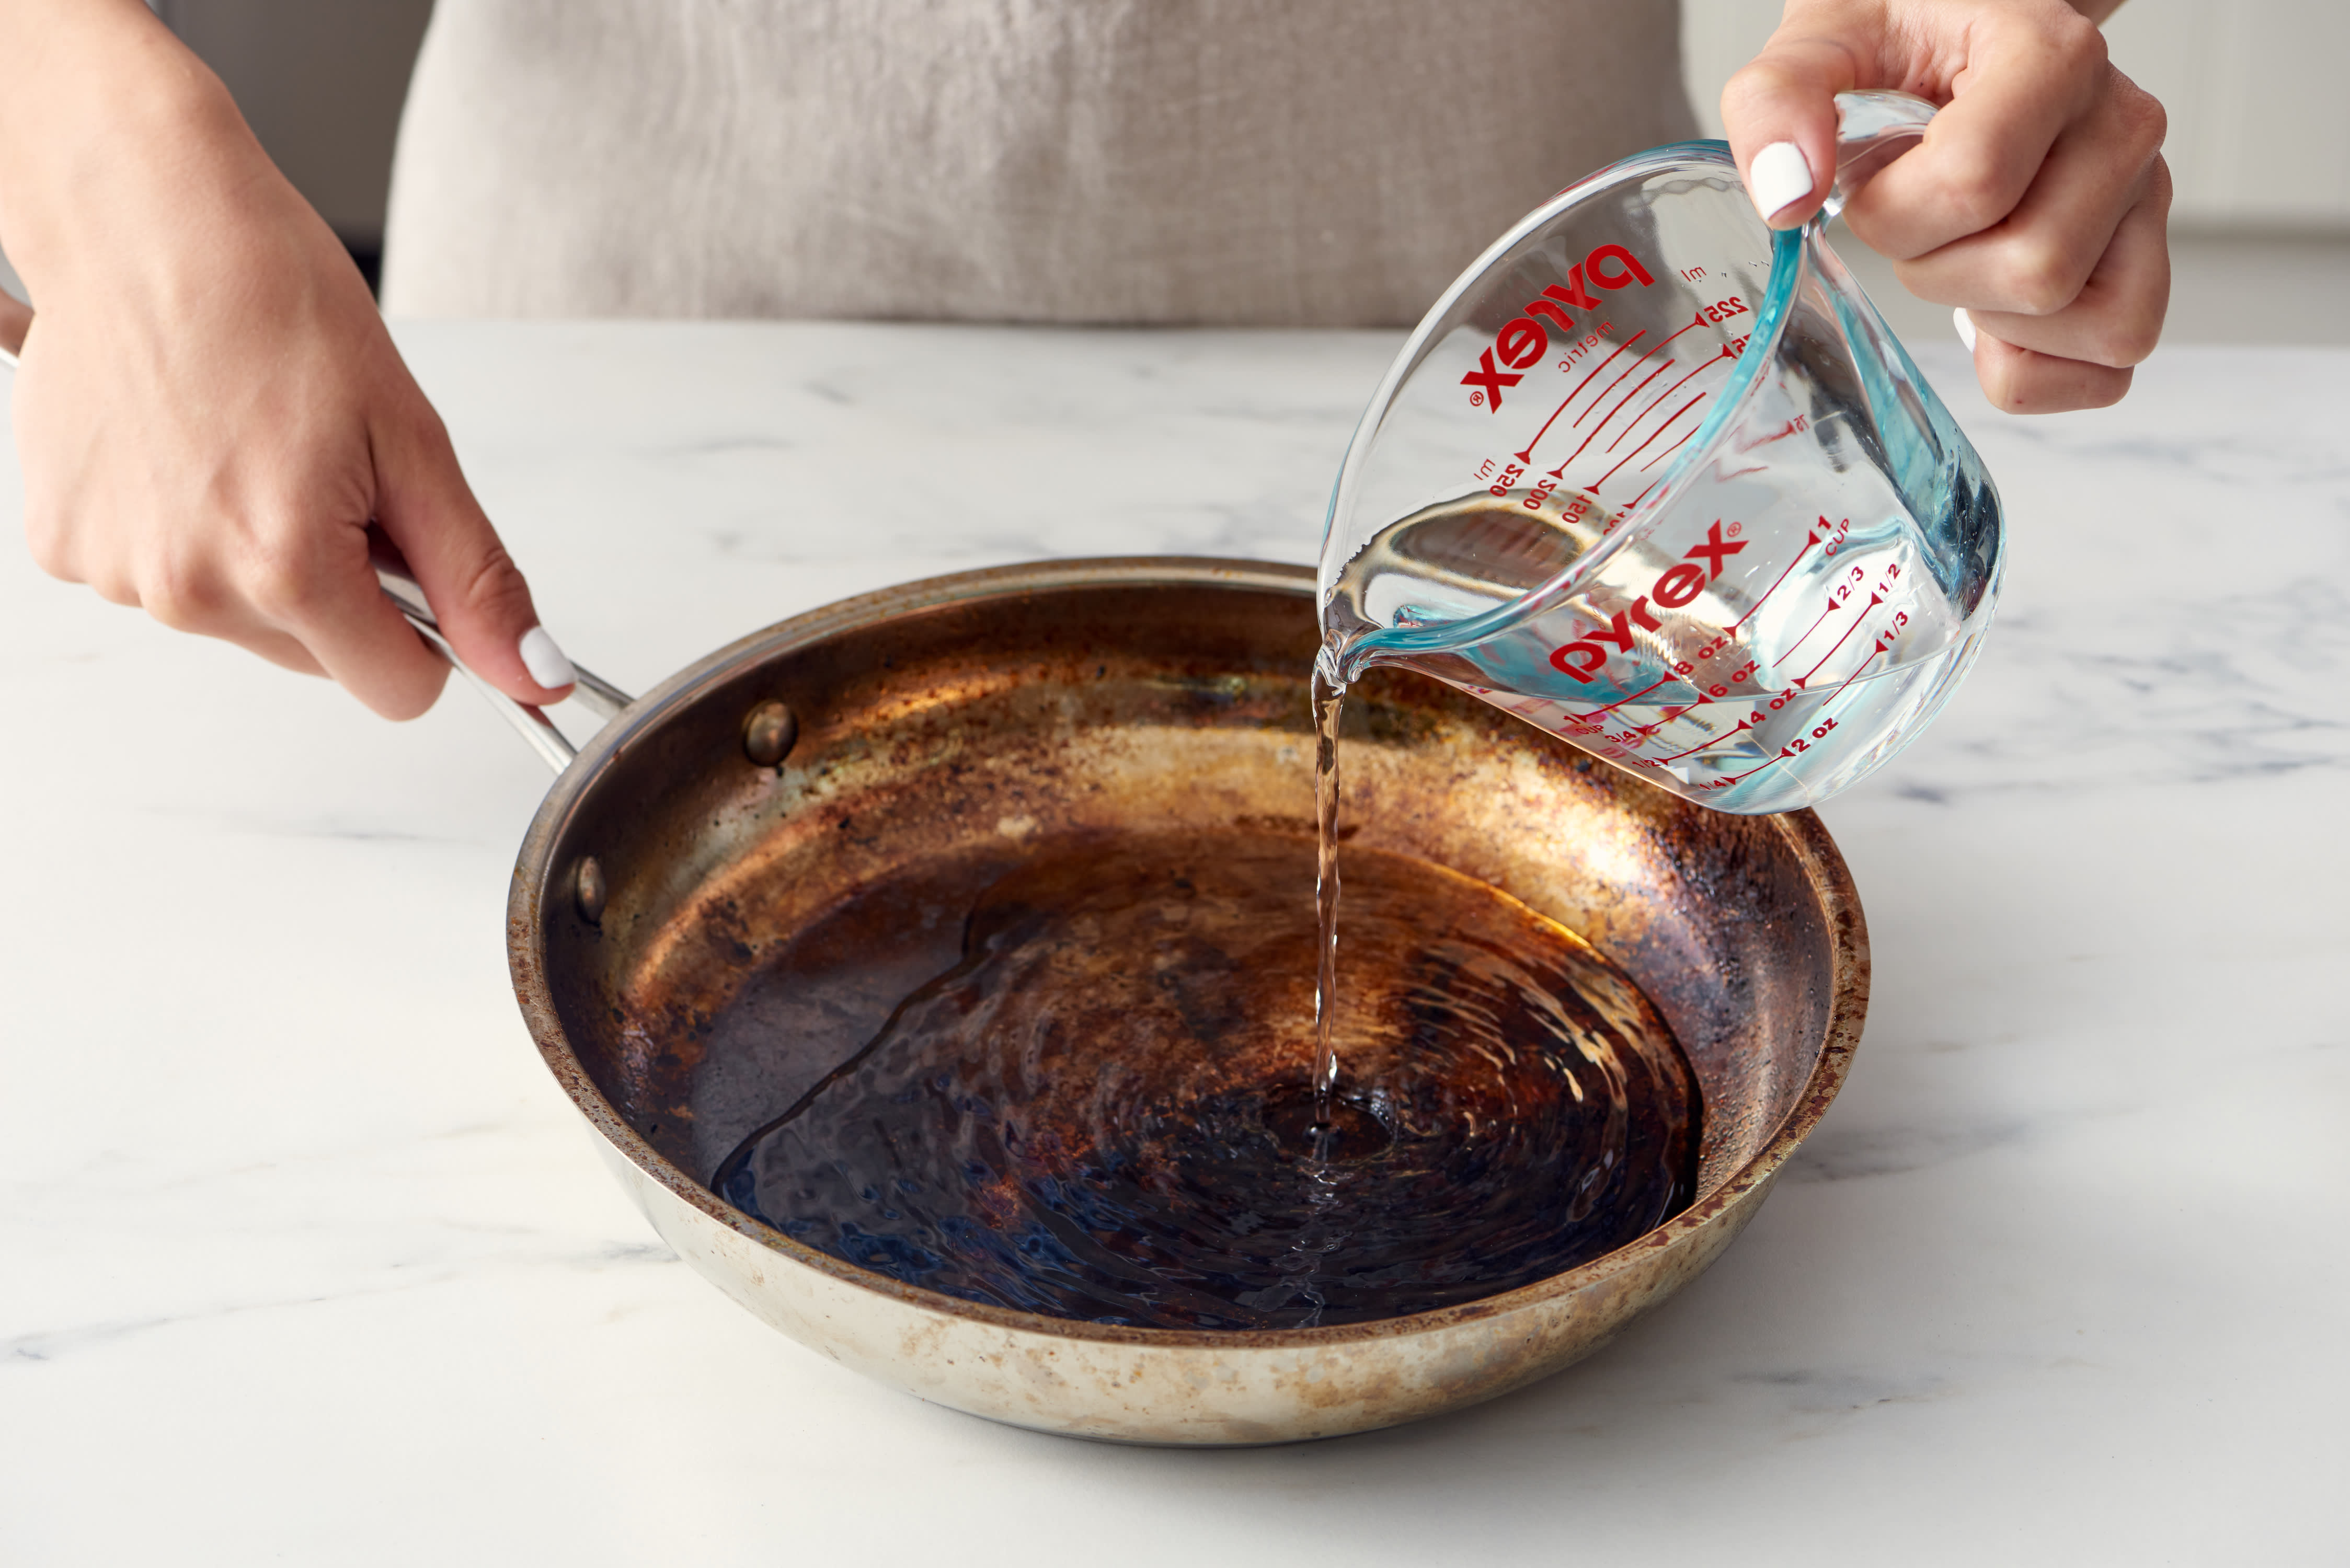 How to Clean a Burnt Pot or Pan - How Do You Clean Scorched